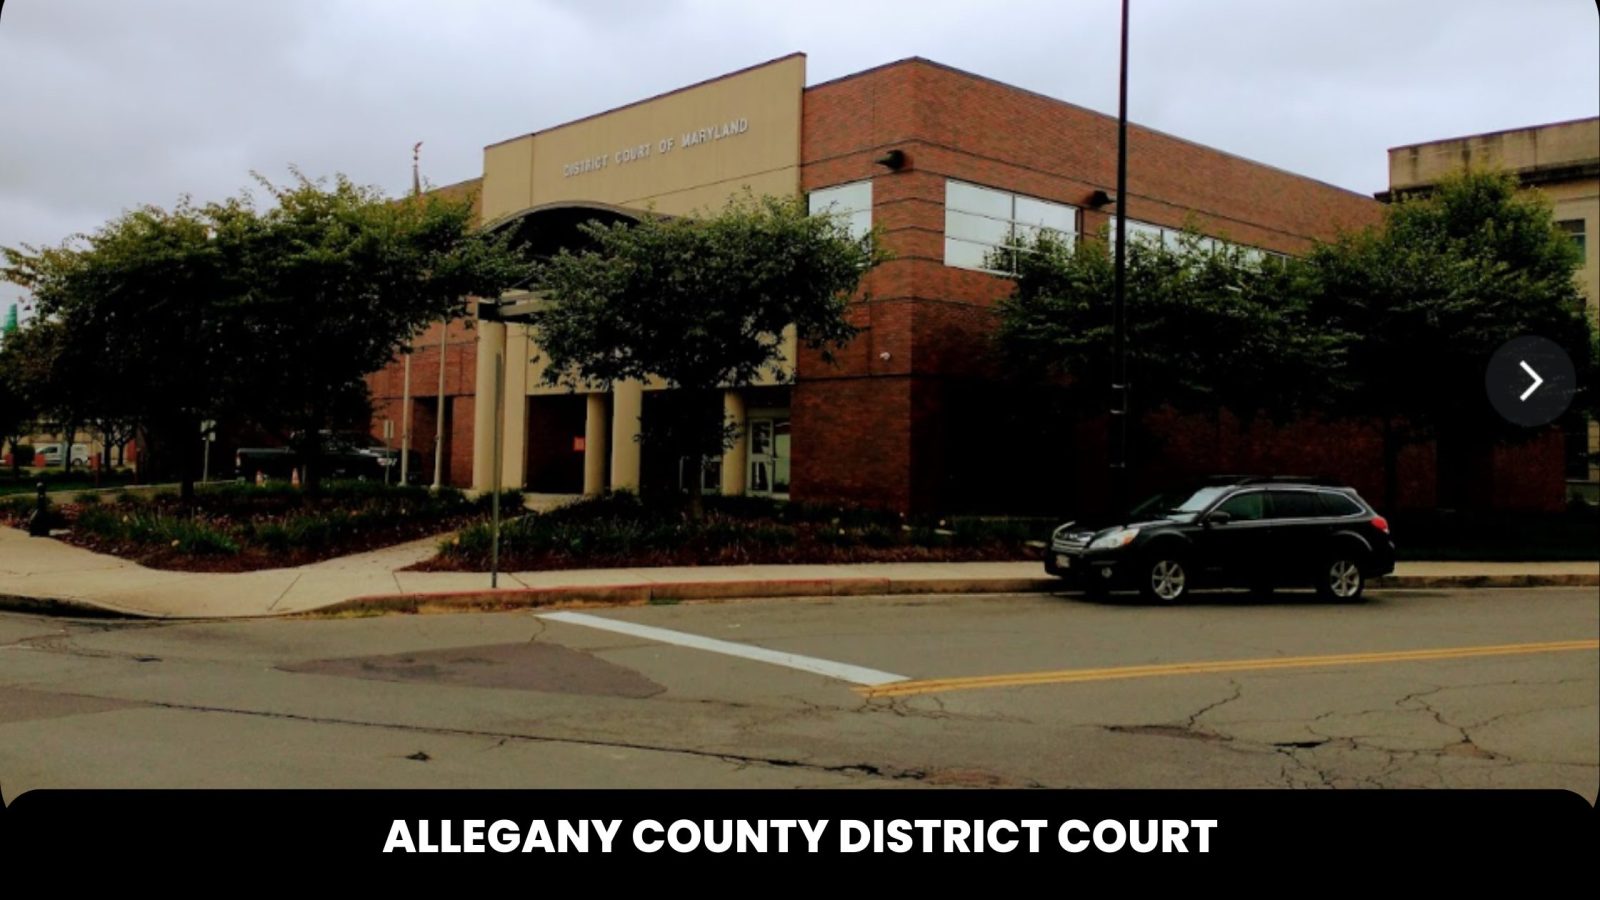 Allegany County District Court